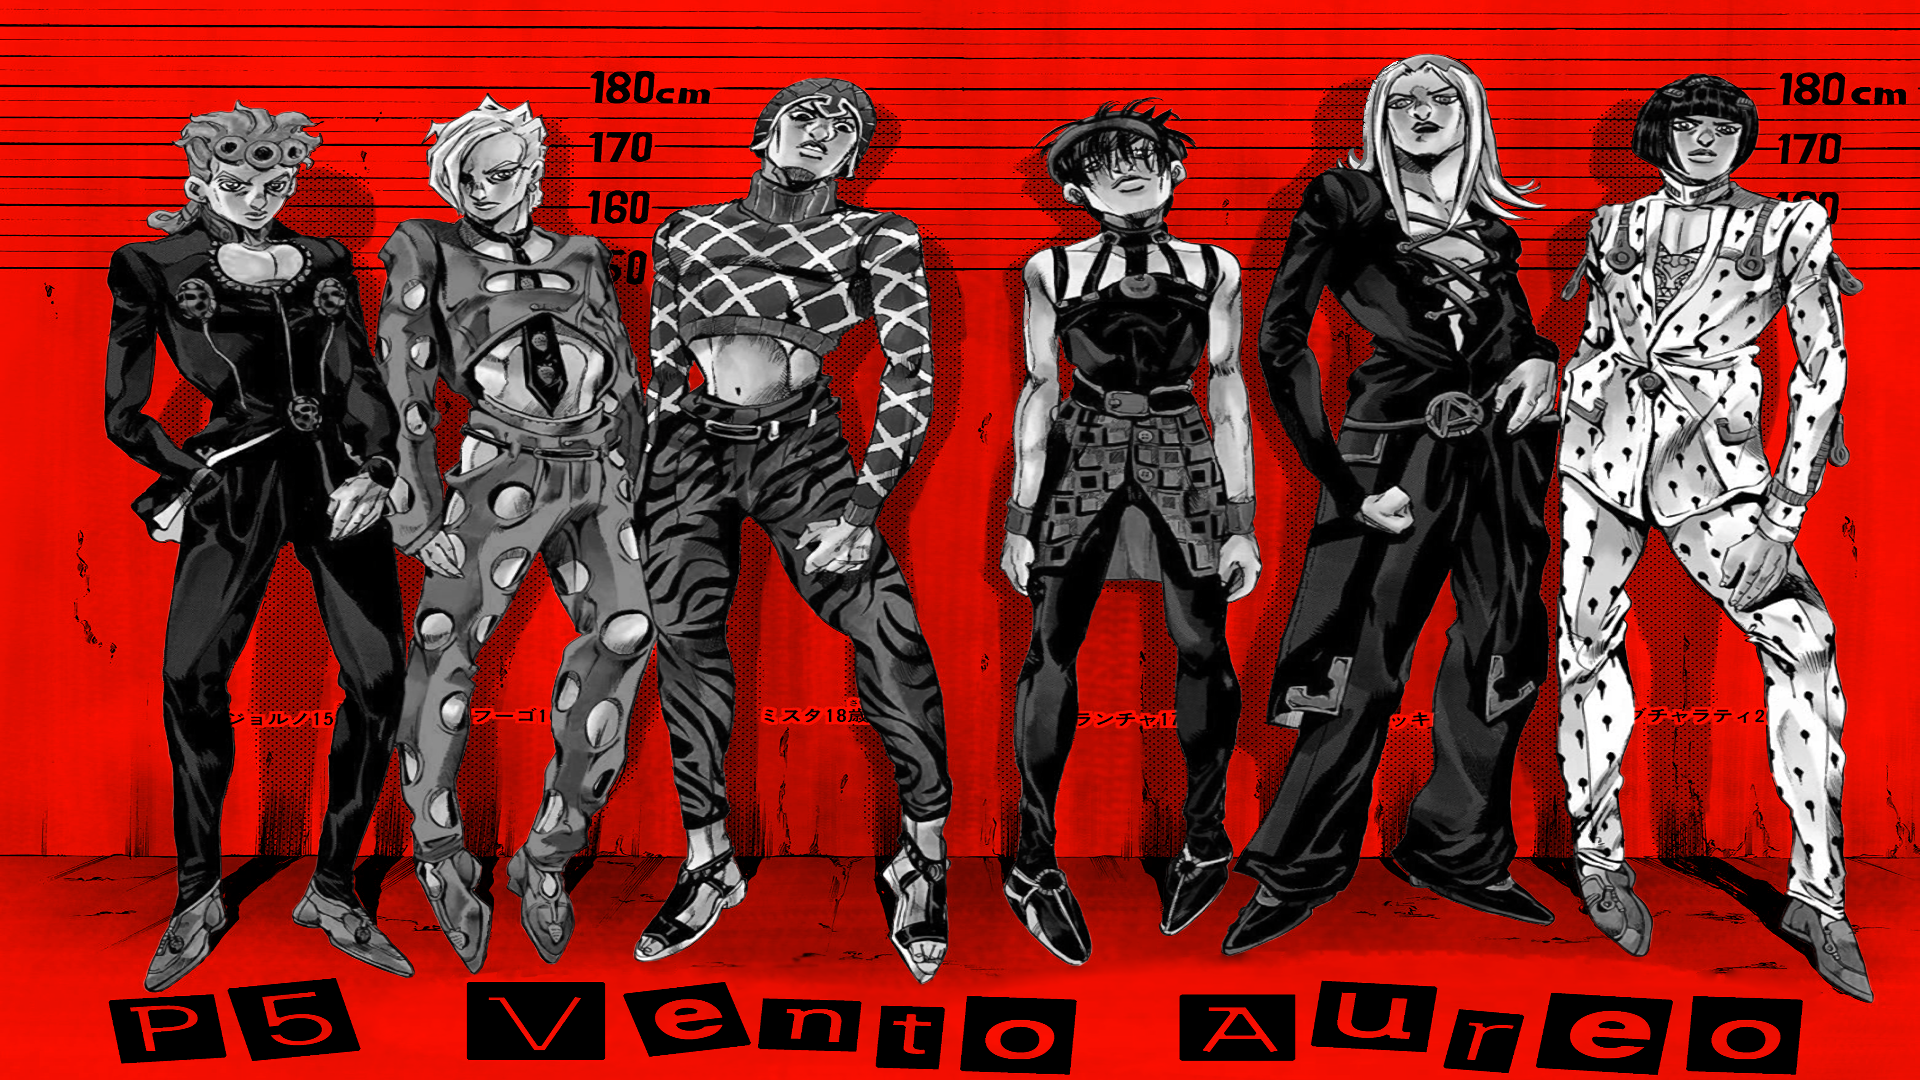 Fanart] Made a Persona 5 x JoJo Part 5 edit xpost from rPersona5